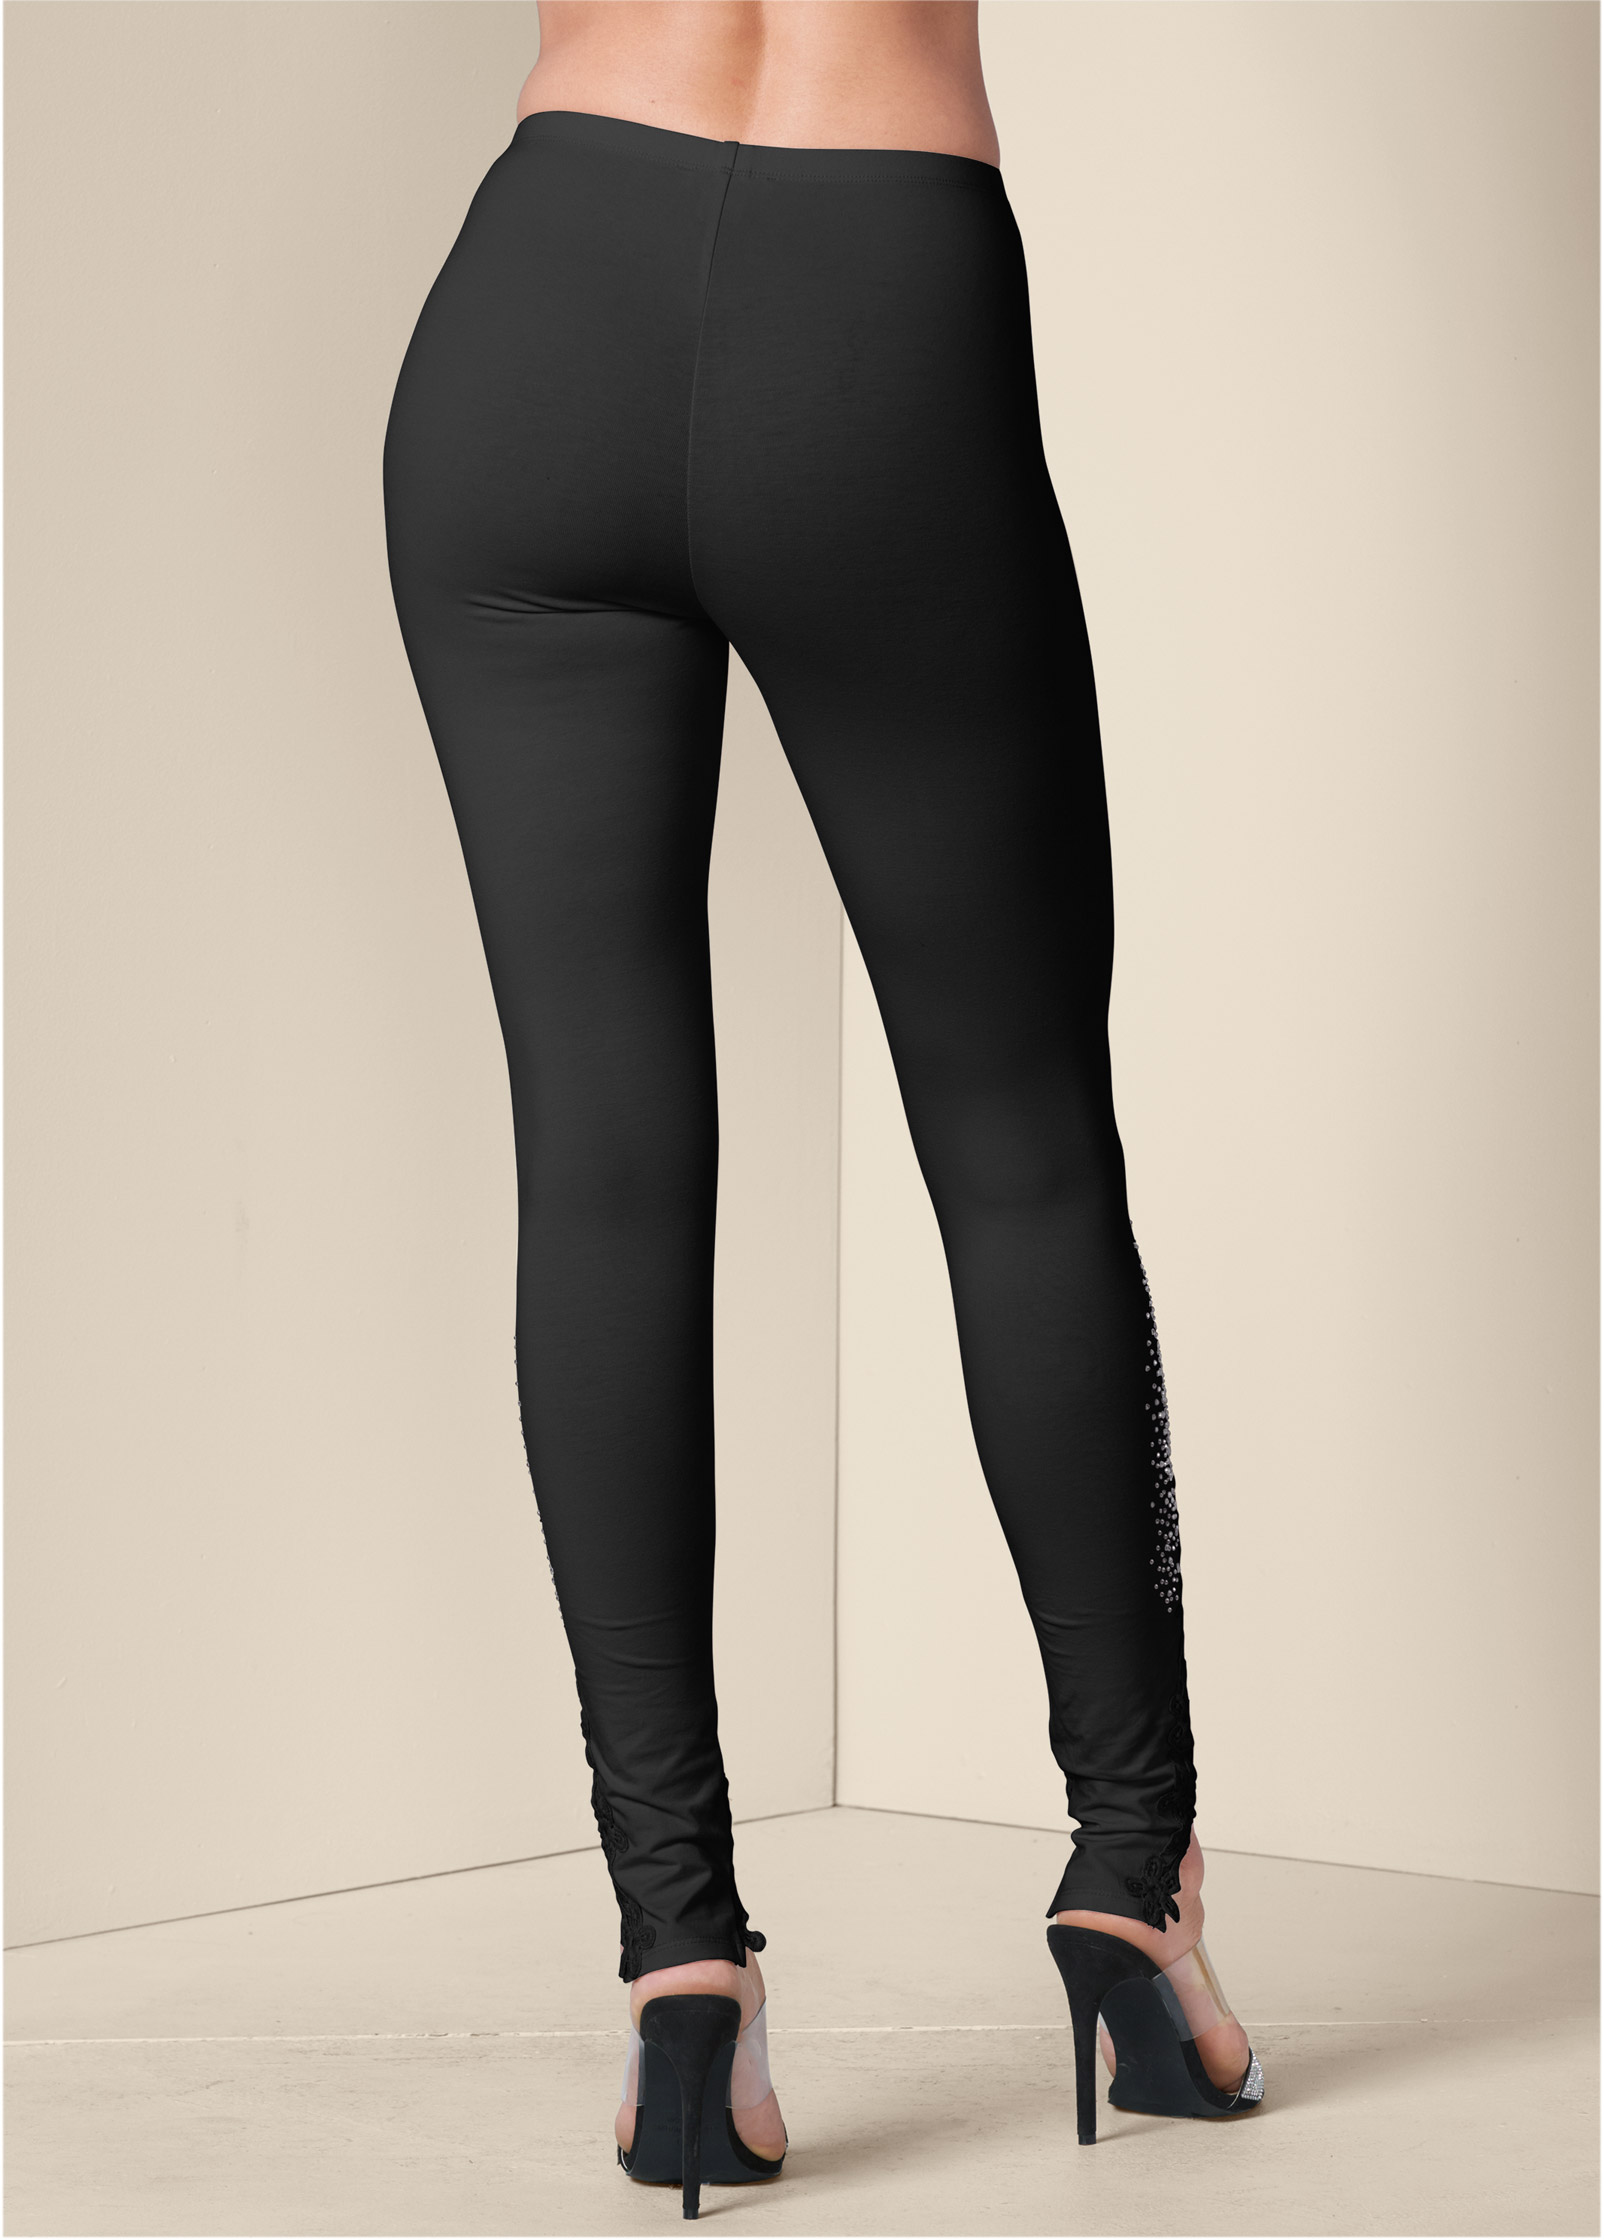 A Byer Womens Pull On Legging with Lace Up Detail 